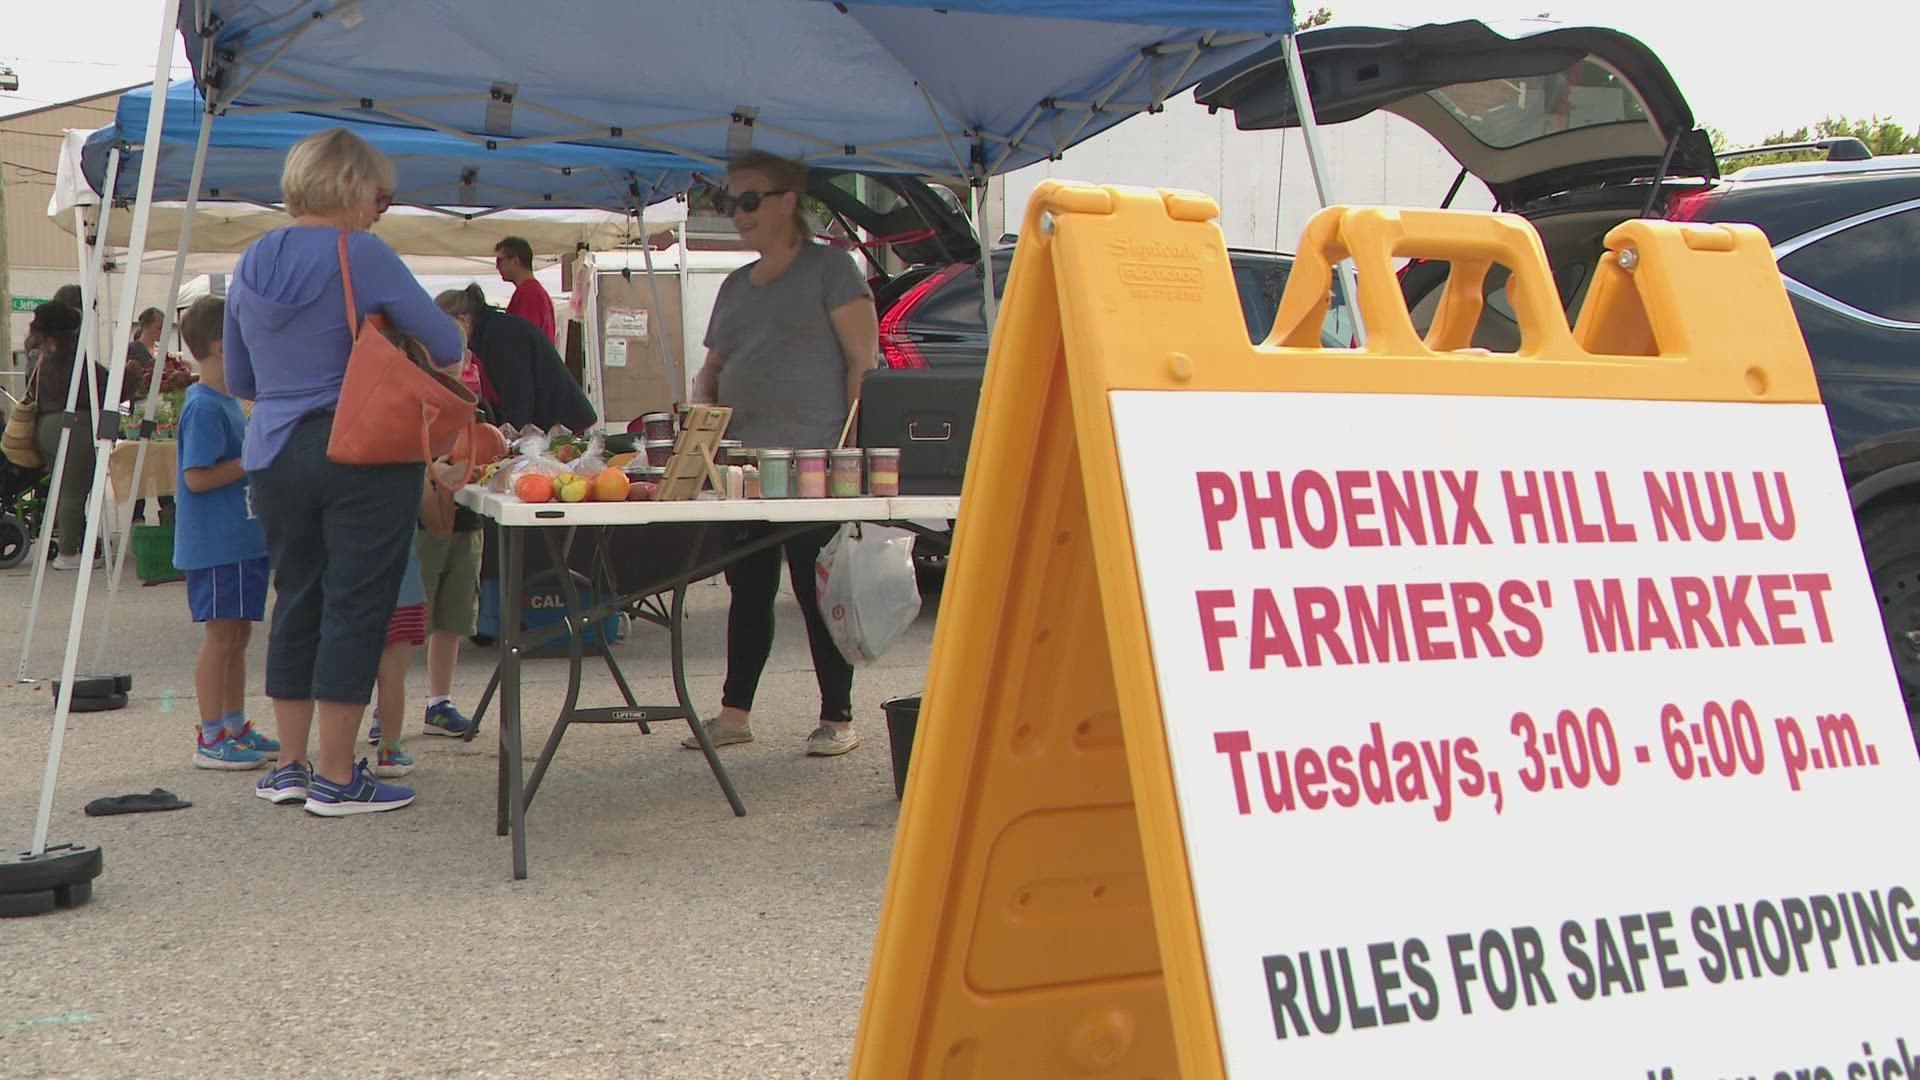 The Phoenix Hill NuLu Farmer's Market is a place where shoppers in Louisville go for farm fresh food at prices lower than what you might find in grocery stores.